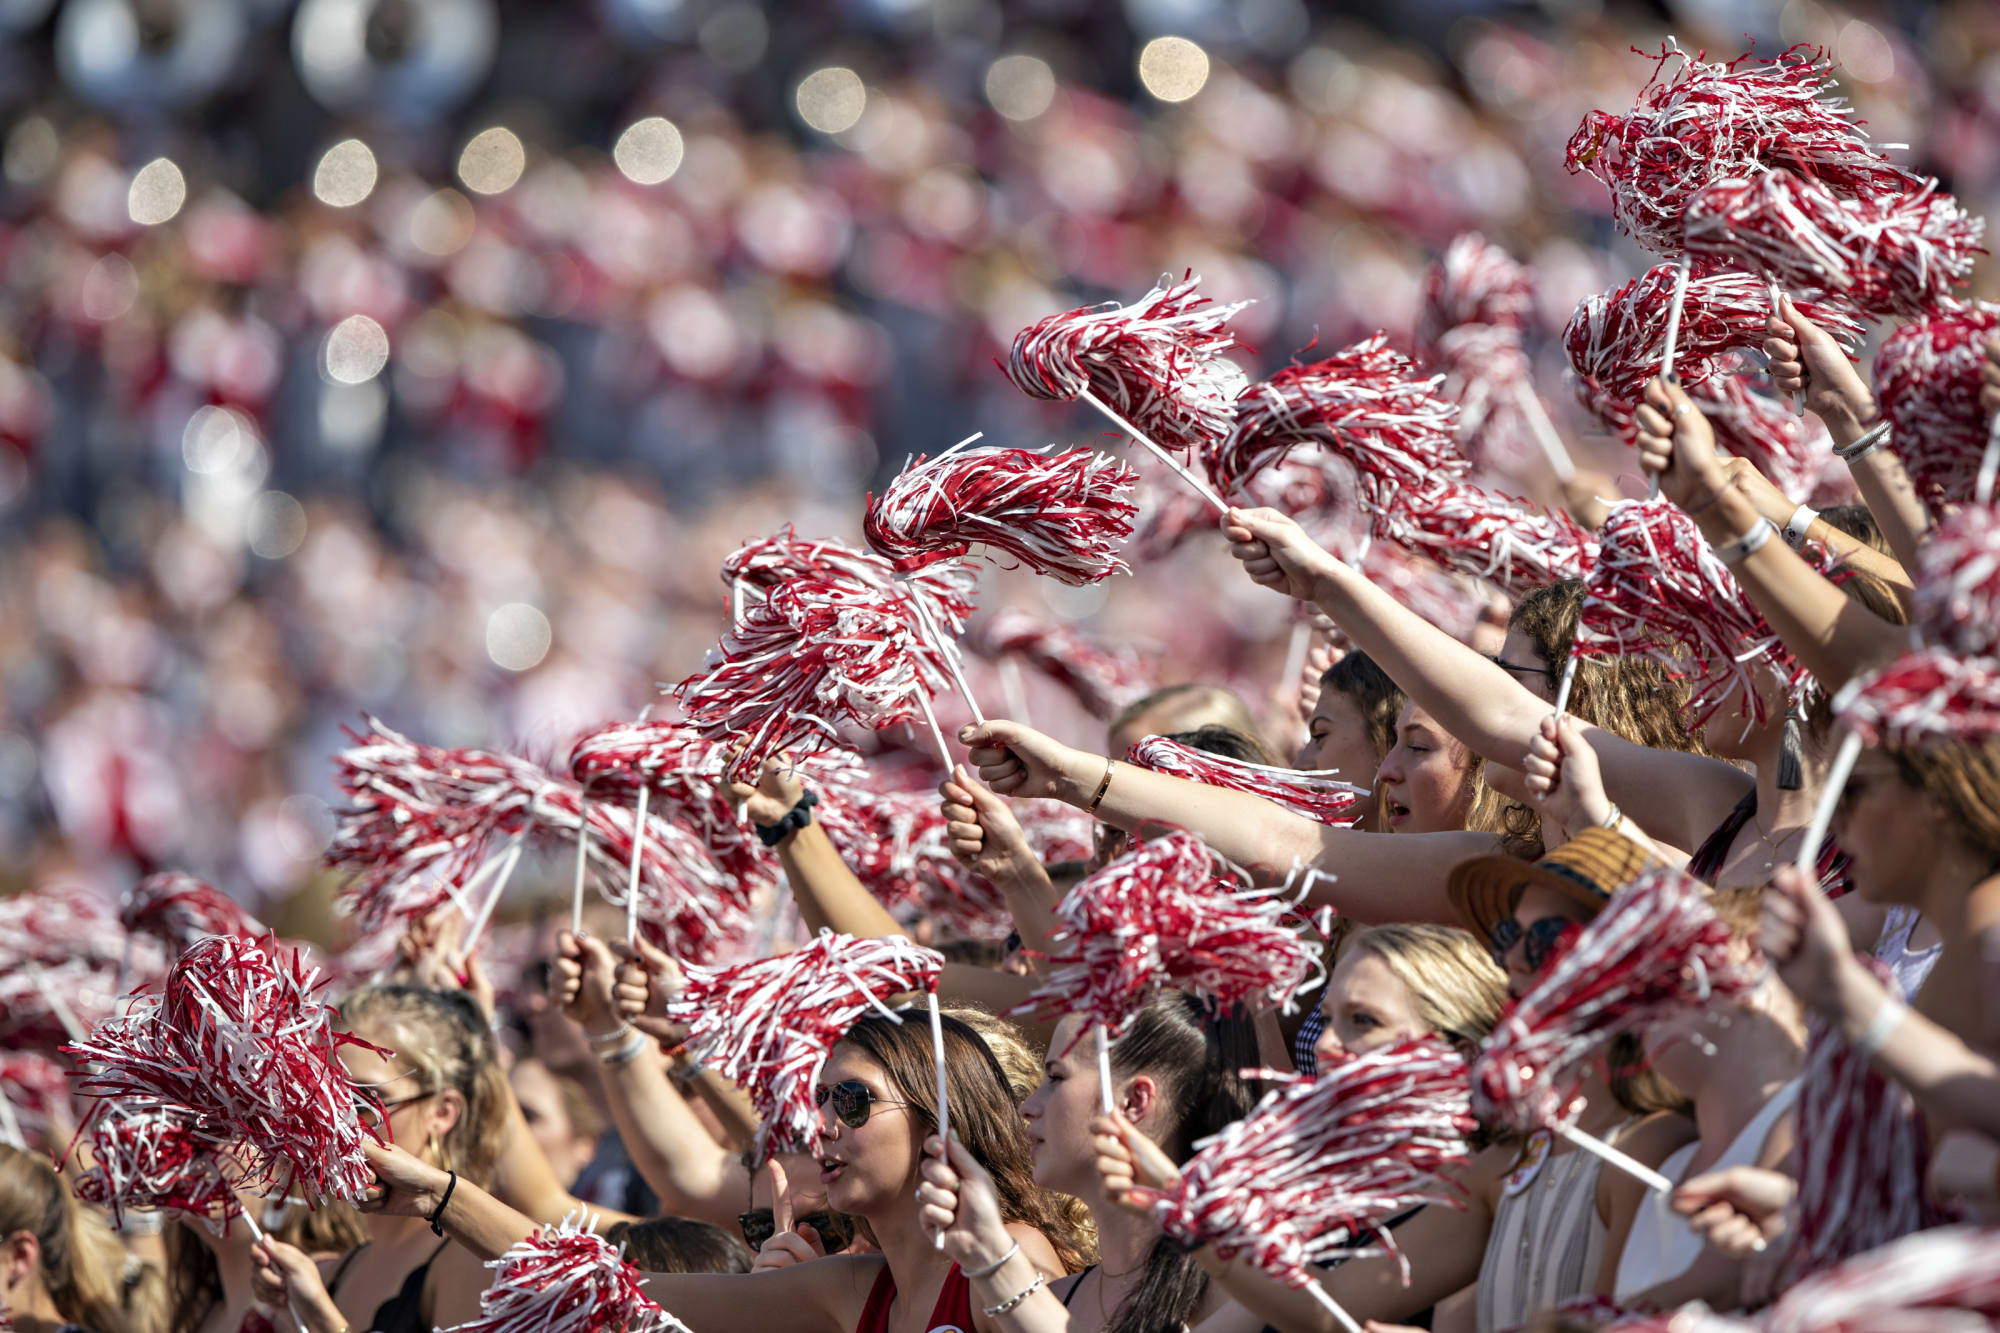 Alabama Football: College football is back today … sort of